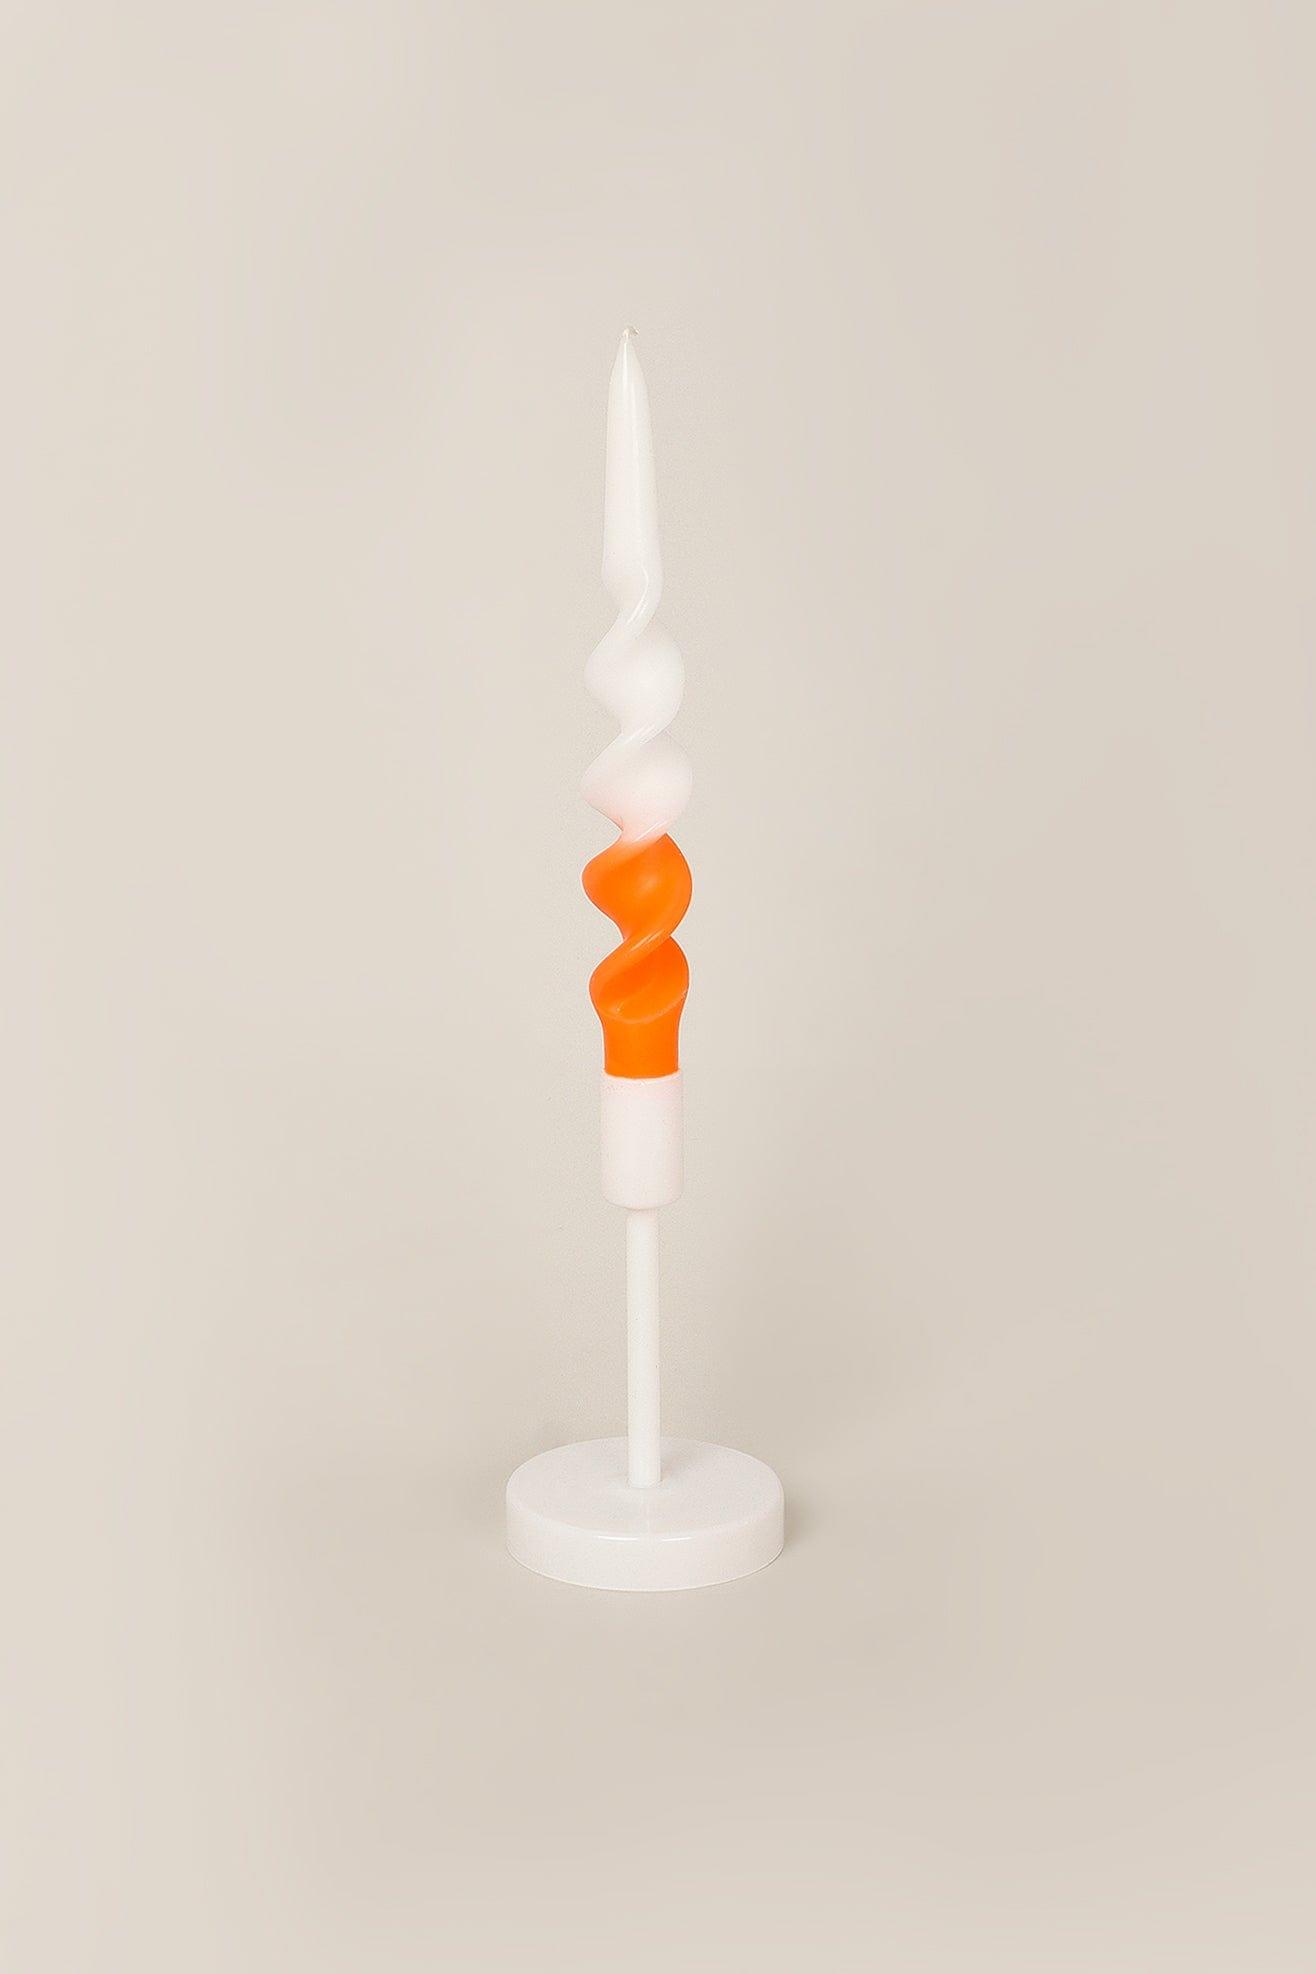 G Decor Candles Blue Set of Two-Toned White and Orange Spiral Twisted Hand Dipped Candlesticks Taper Church Dinner Candles